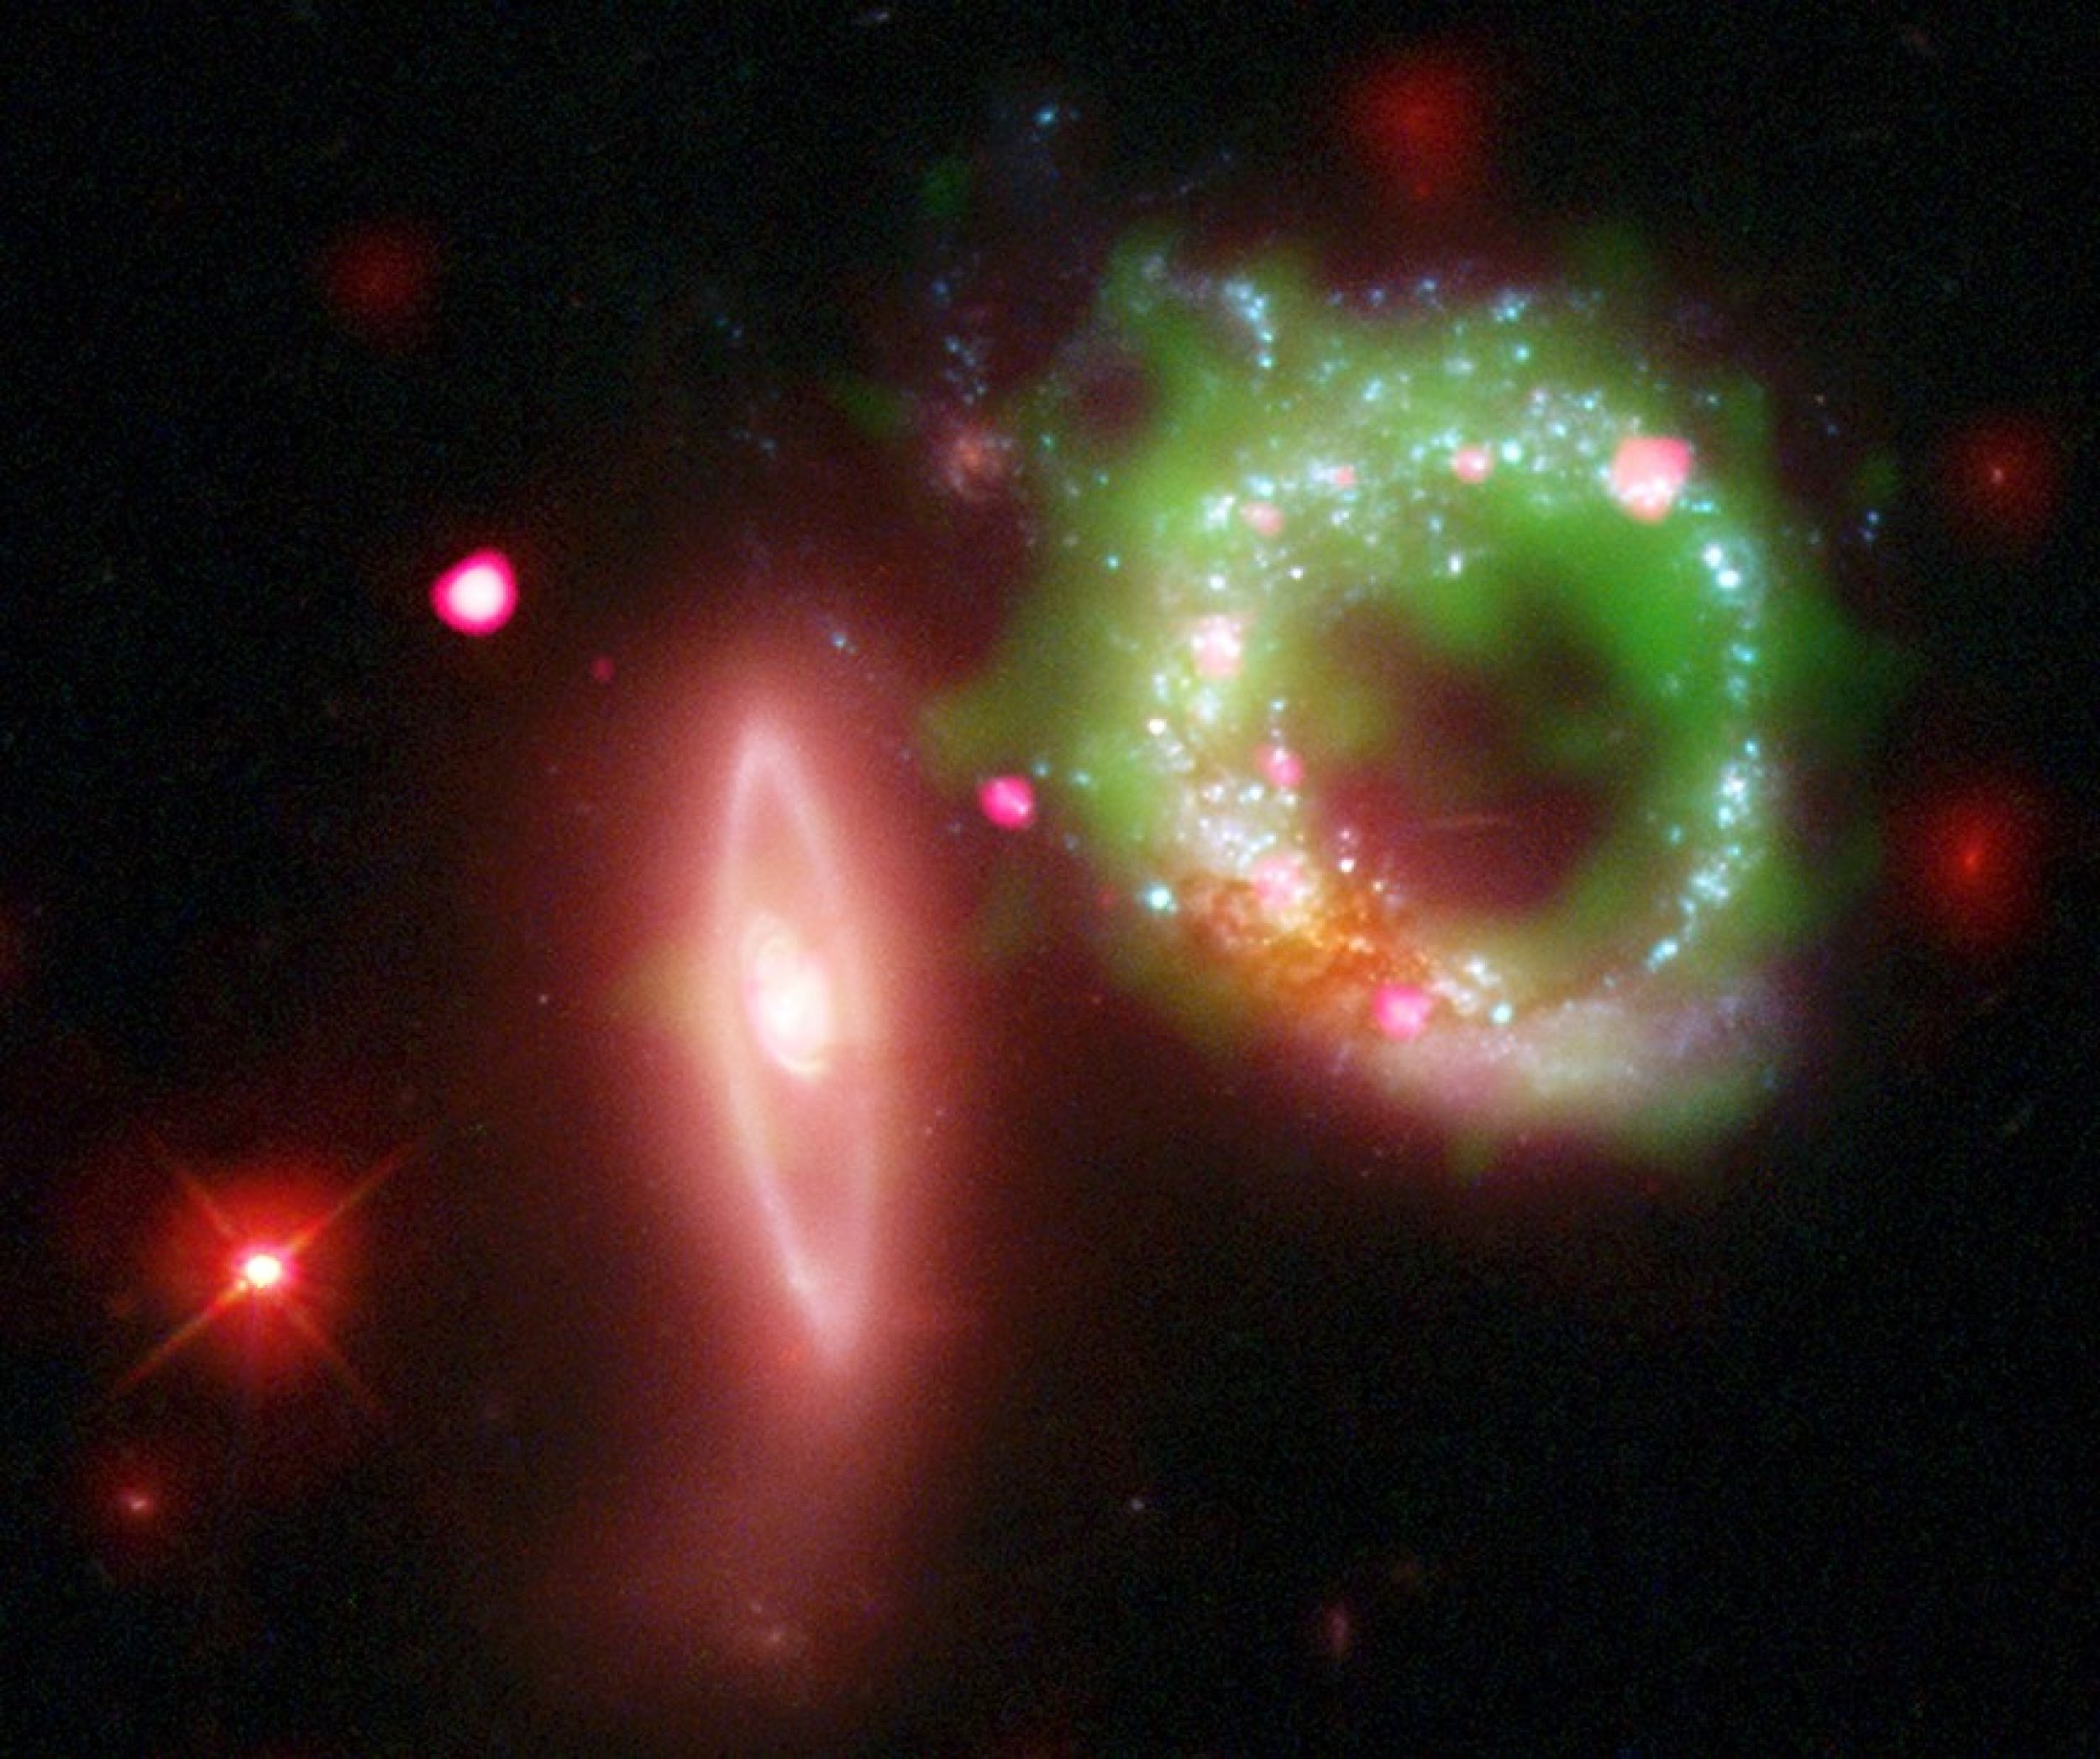 X-ray, Optical, Infrared and UV Image of Arp 147